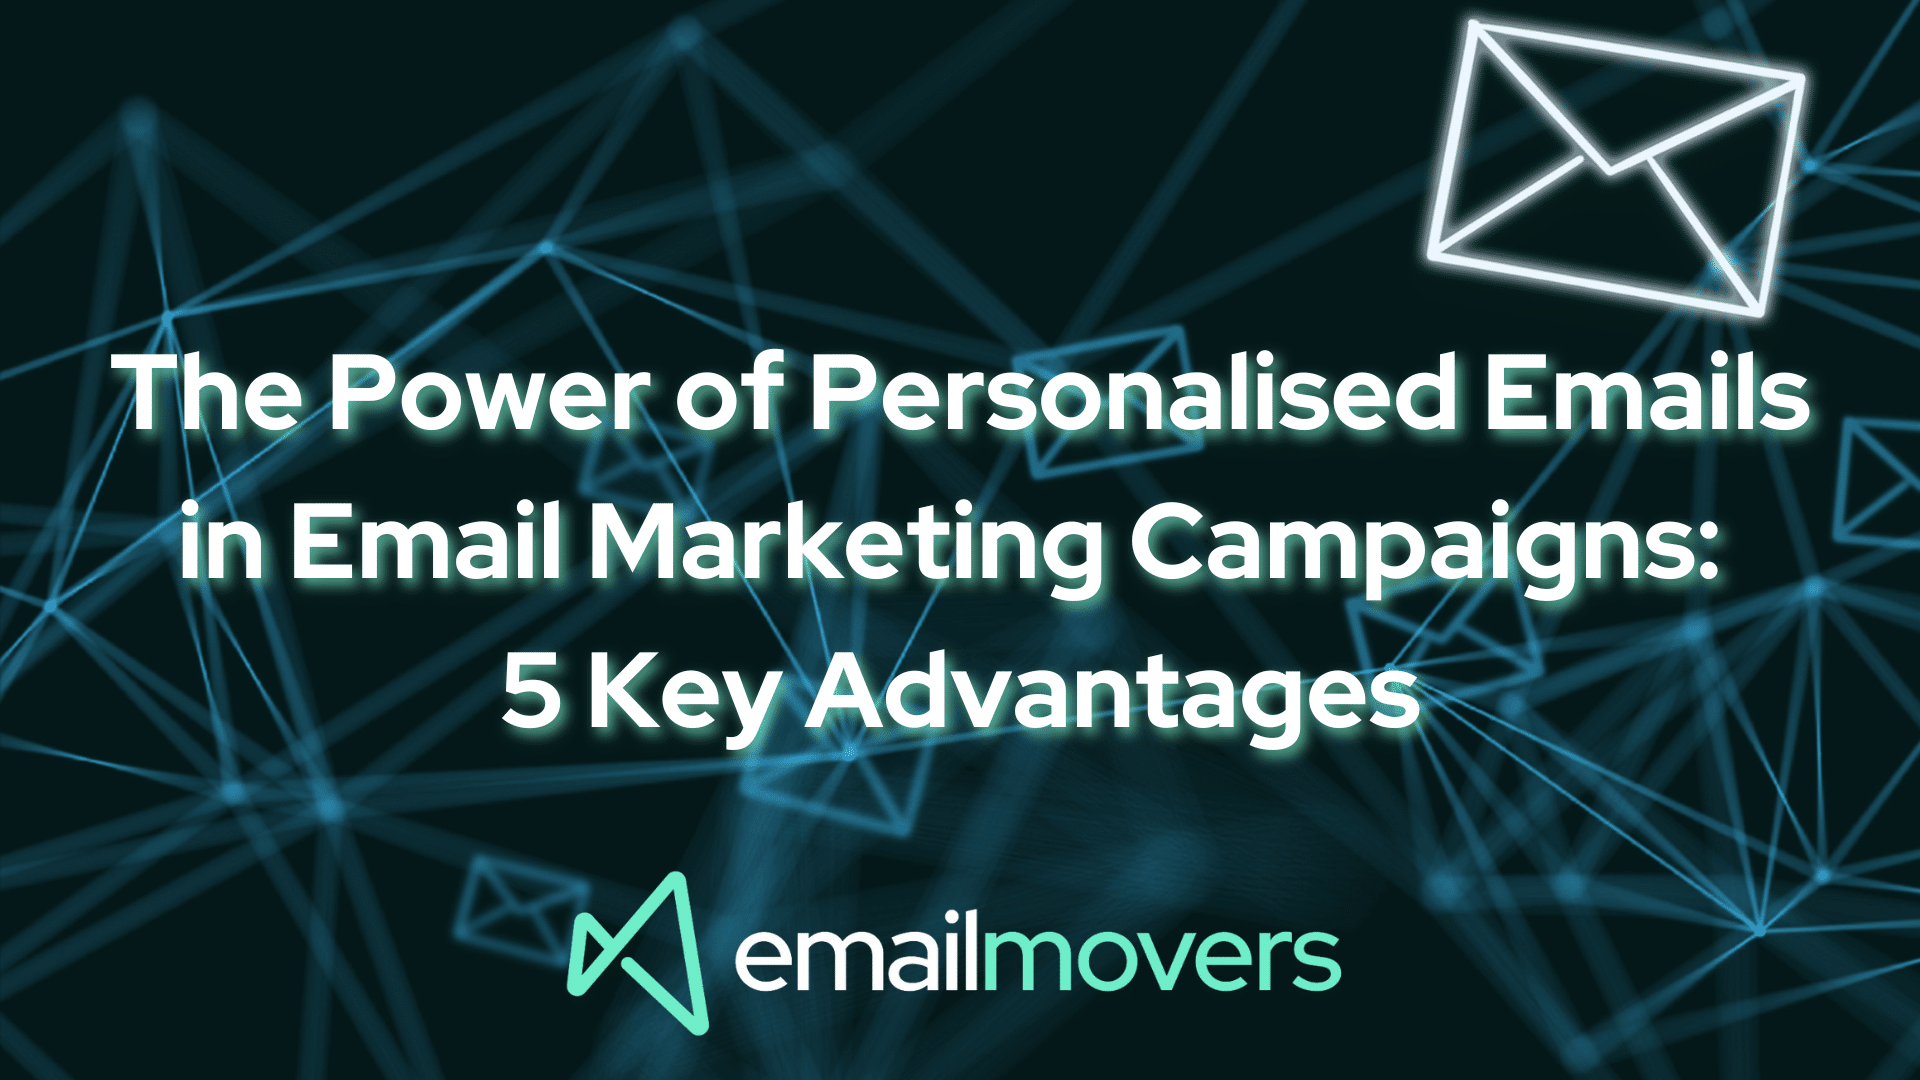 The power of personalised email in email marketing campaigns: 5 Key advantages